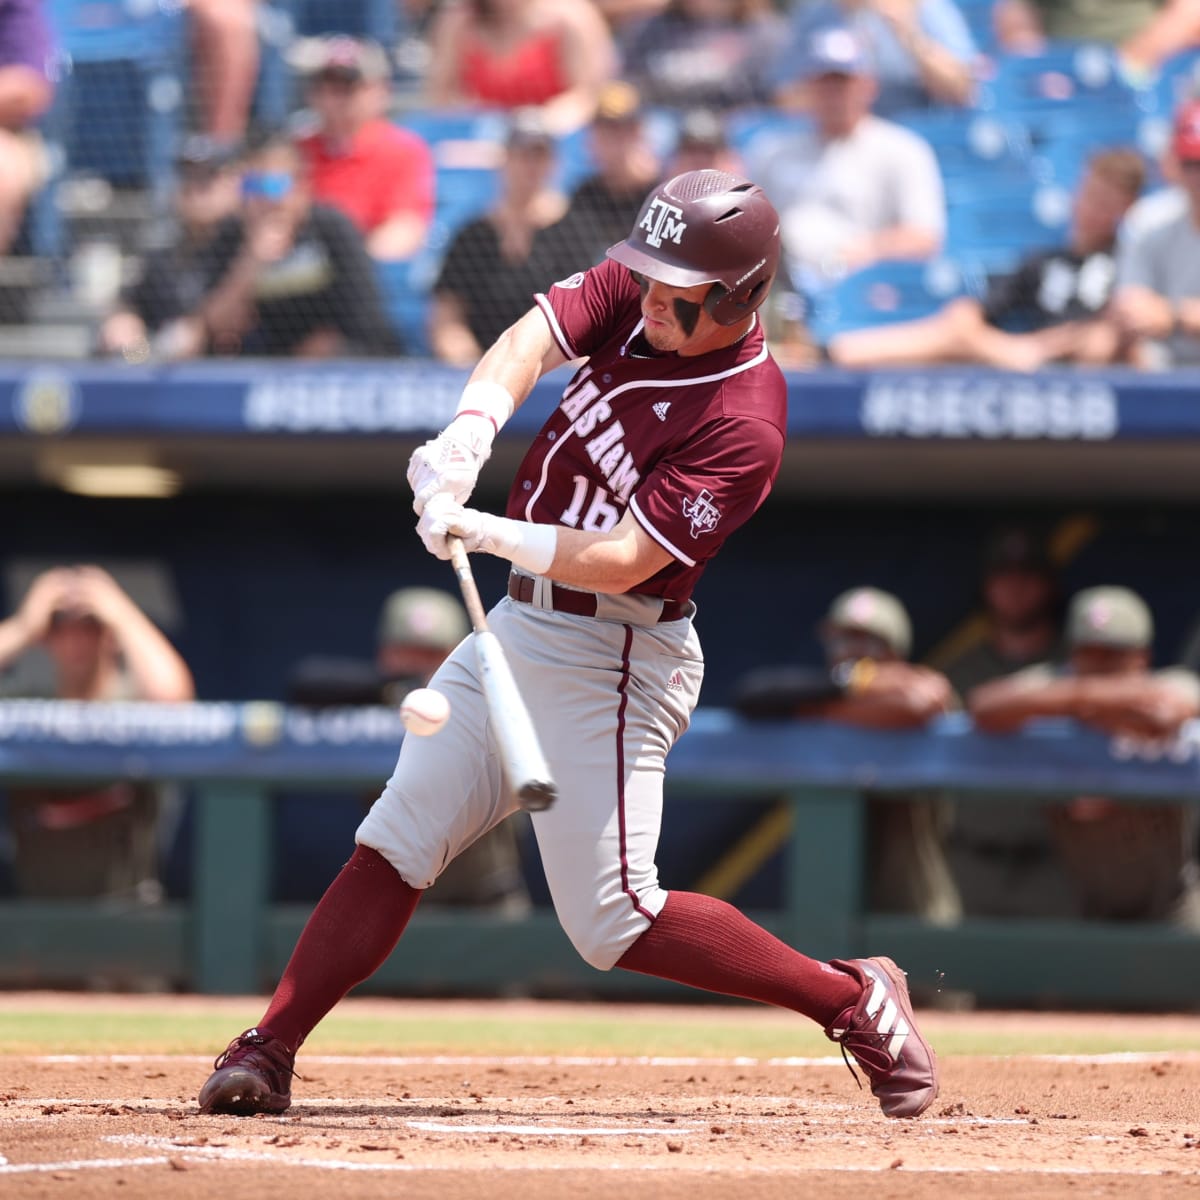 SEC baseball tournament: Texas A&M, seeded 10th, loses 10-4 in title game  to Vanderbilt